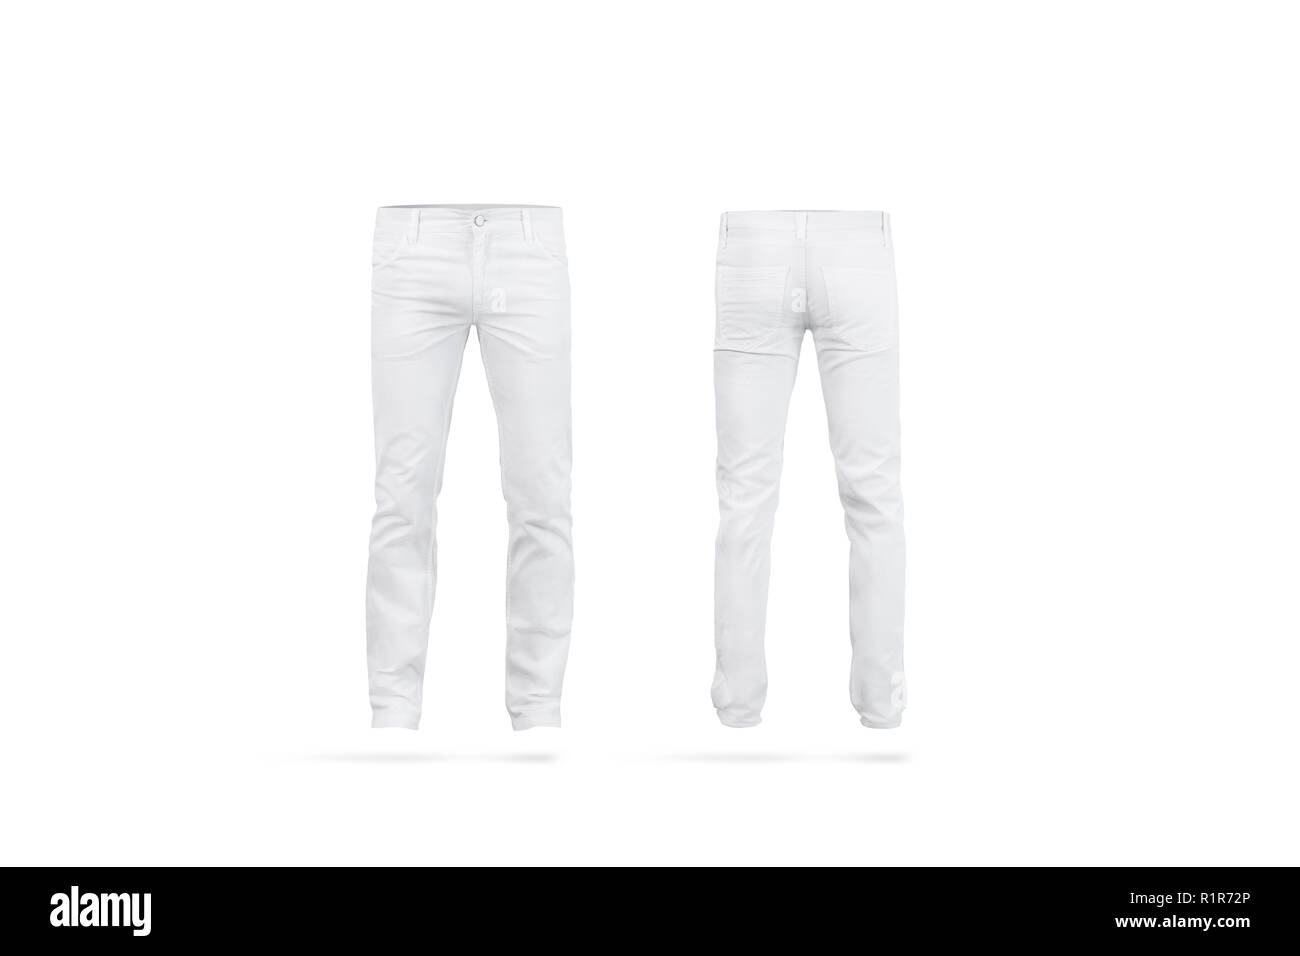 Download Blank white mens pants mock up, isolated, front and back ...